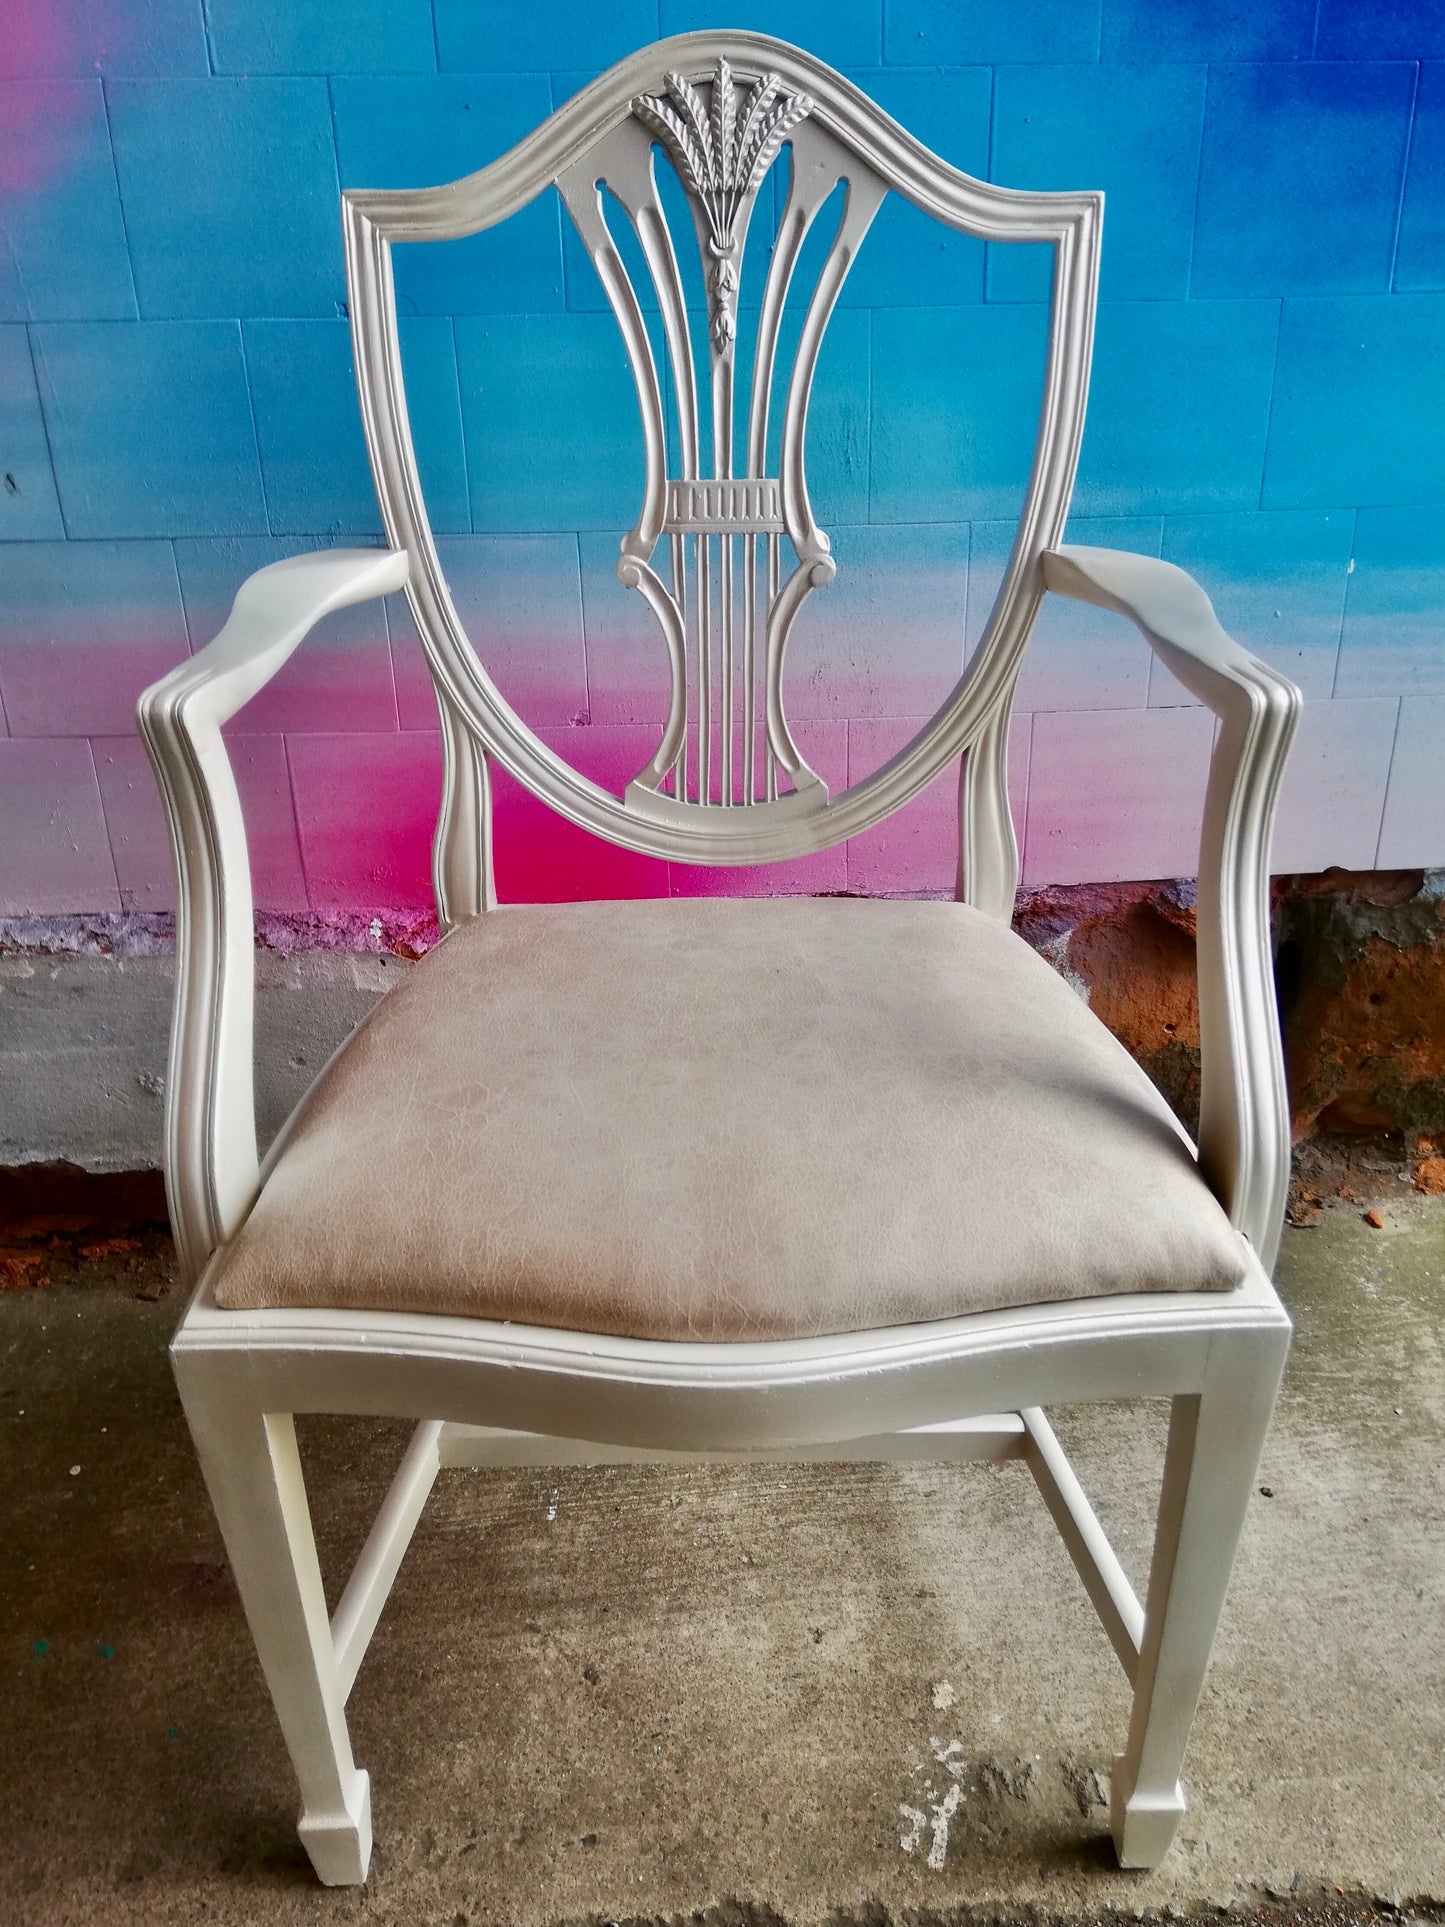 Vintage ornate carver chair  to be painted in Pearl and champagne